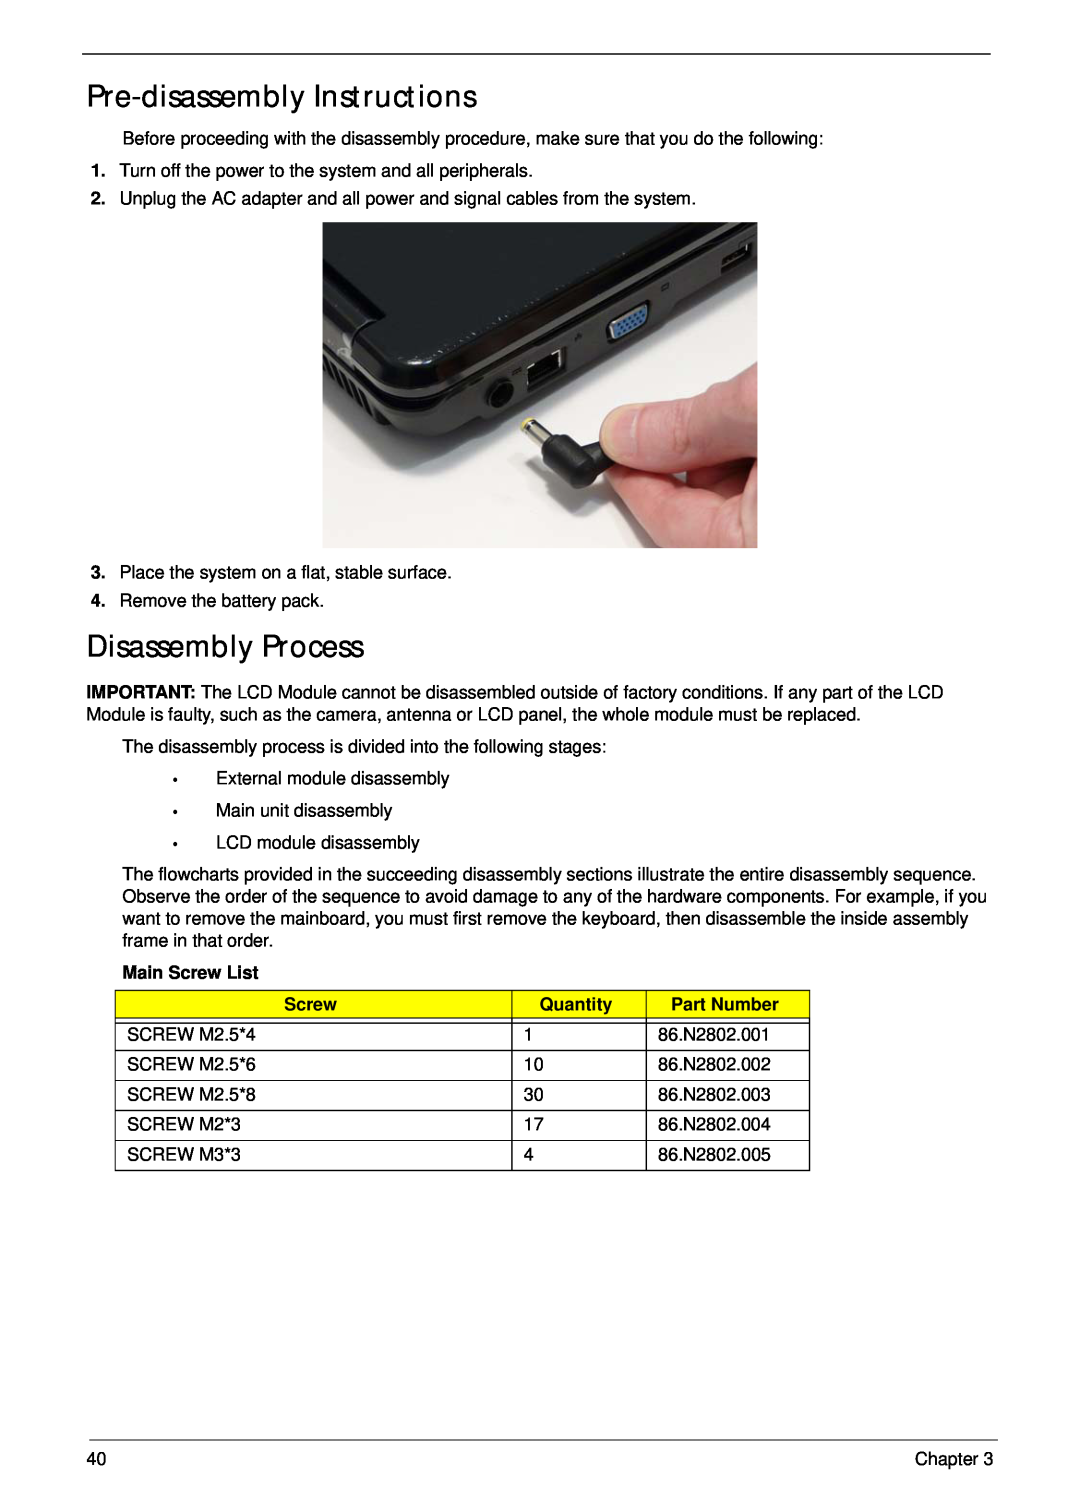 Acer 5532 manual Pre-disassembly Instructions, Disassembly Process, Main Screw List, Quantity, Part Number 